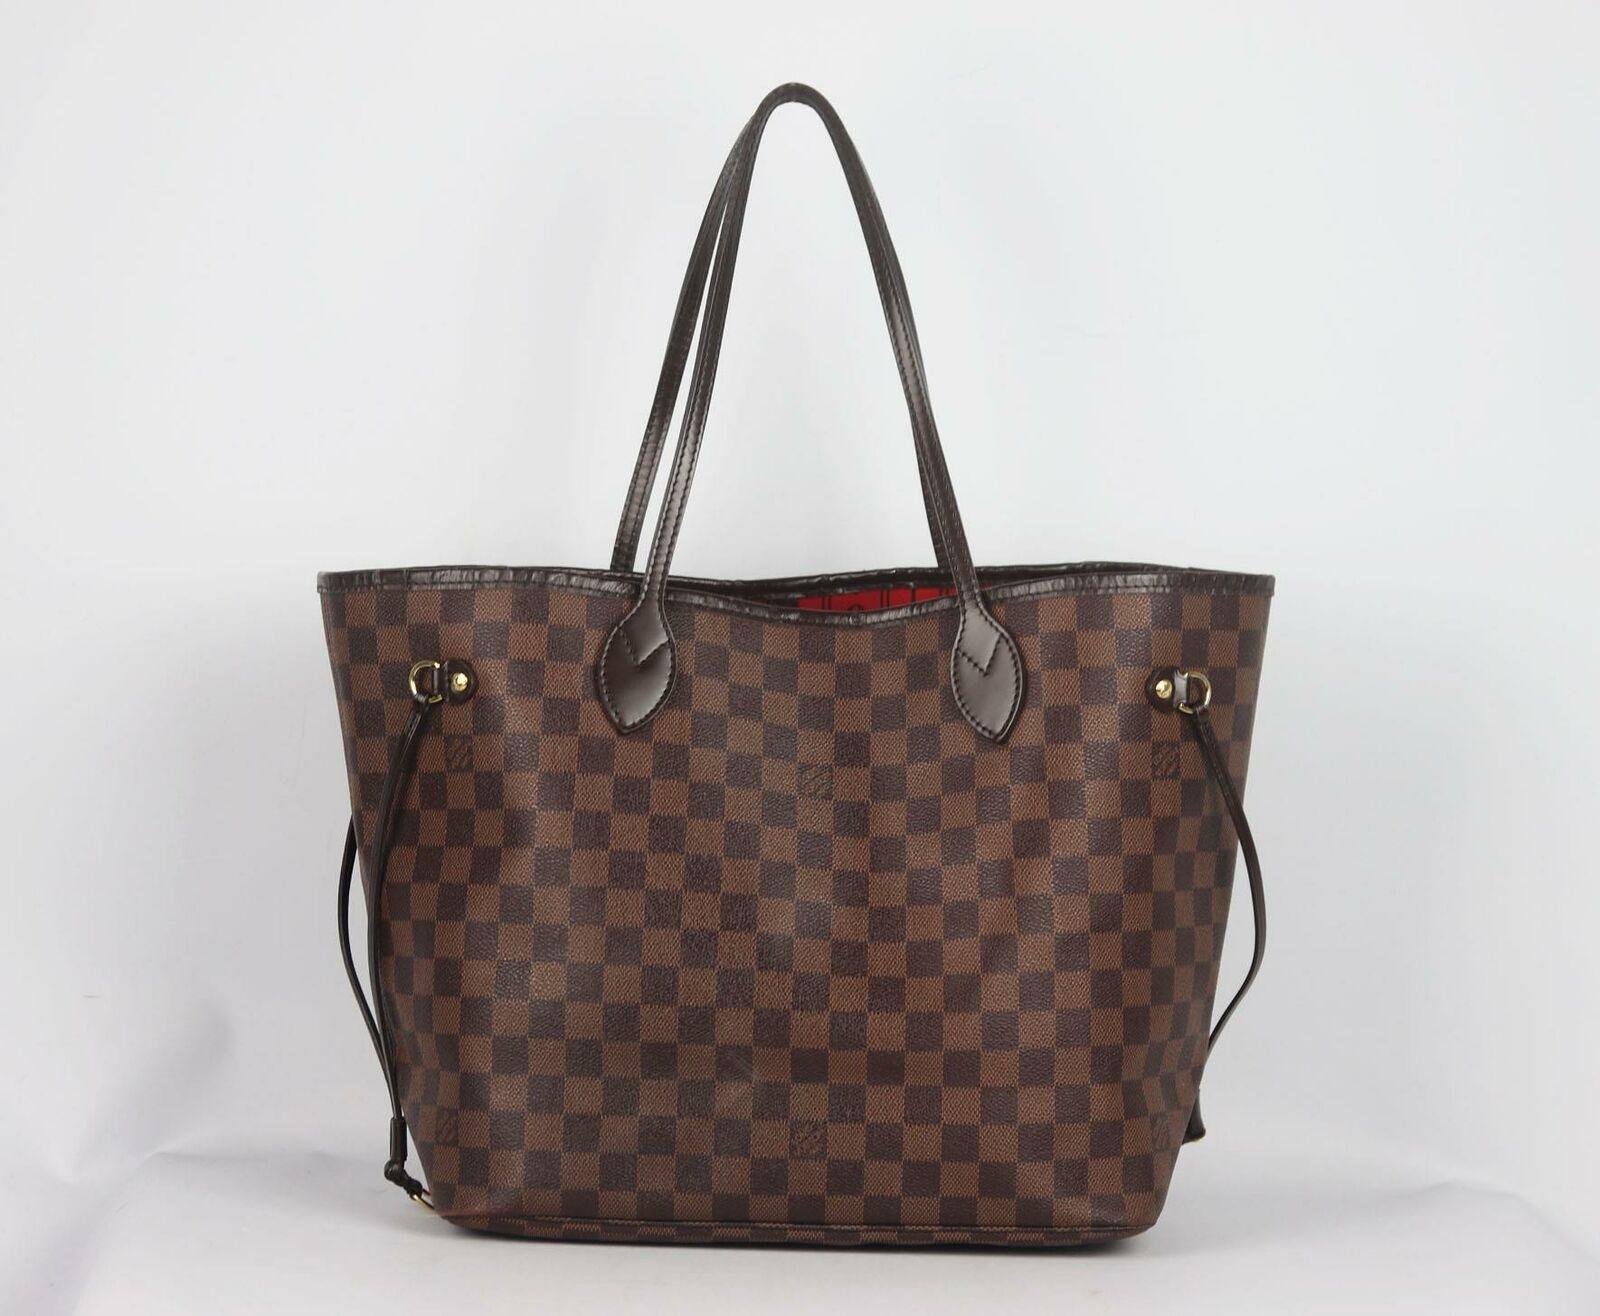 Louis Vuitton's classic 'Neverfall' bag in brown and beige Damier Ebène coated-canvas with leather accents, this 'MM' structured style has a spacious compartment lined in the brand's iconic red striped canvas with internal clip to attach your items